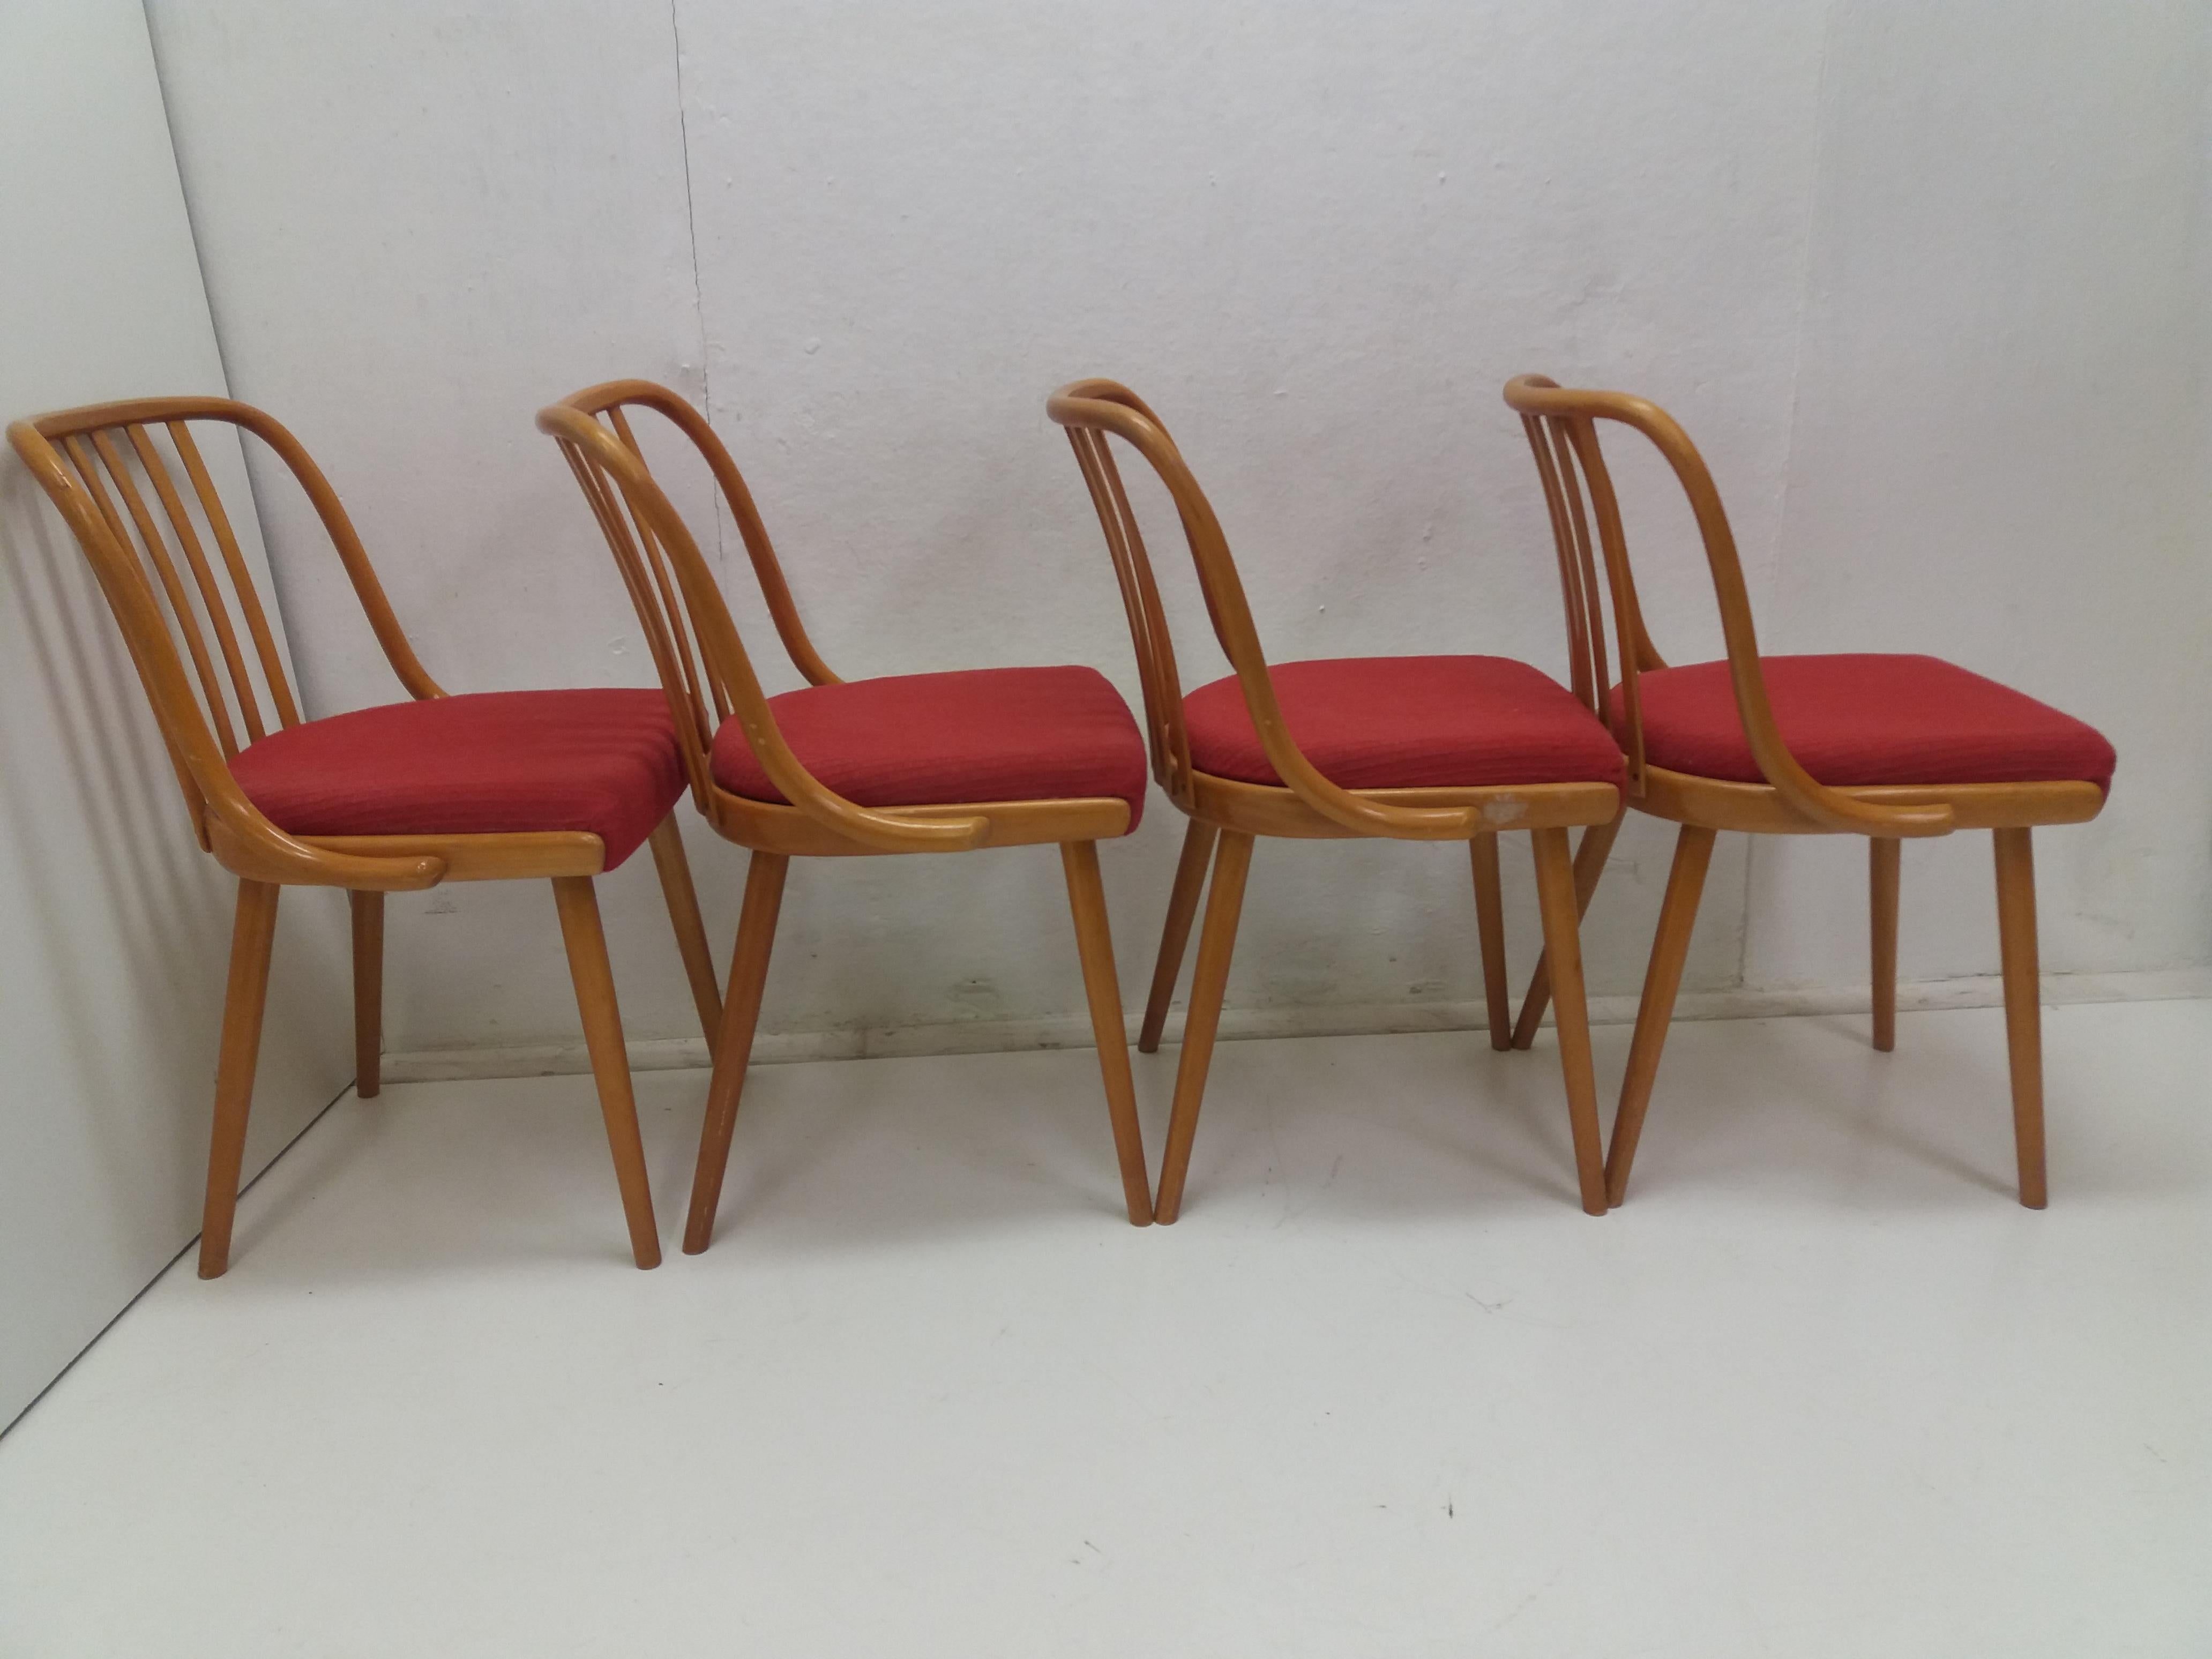 1960 Set of 4 Retro Suman Chairs and Table, Czechoslovakia For Sale 7